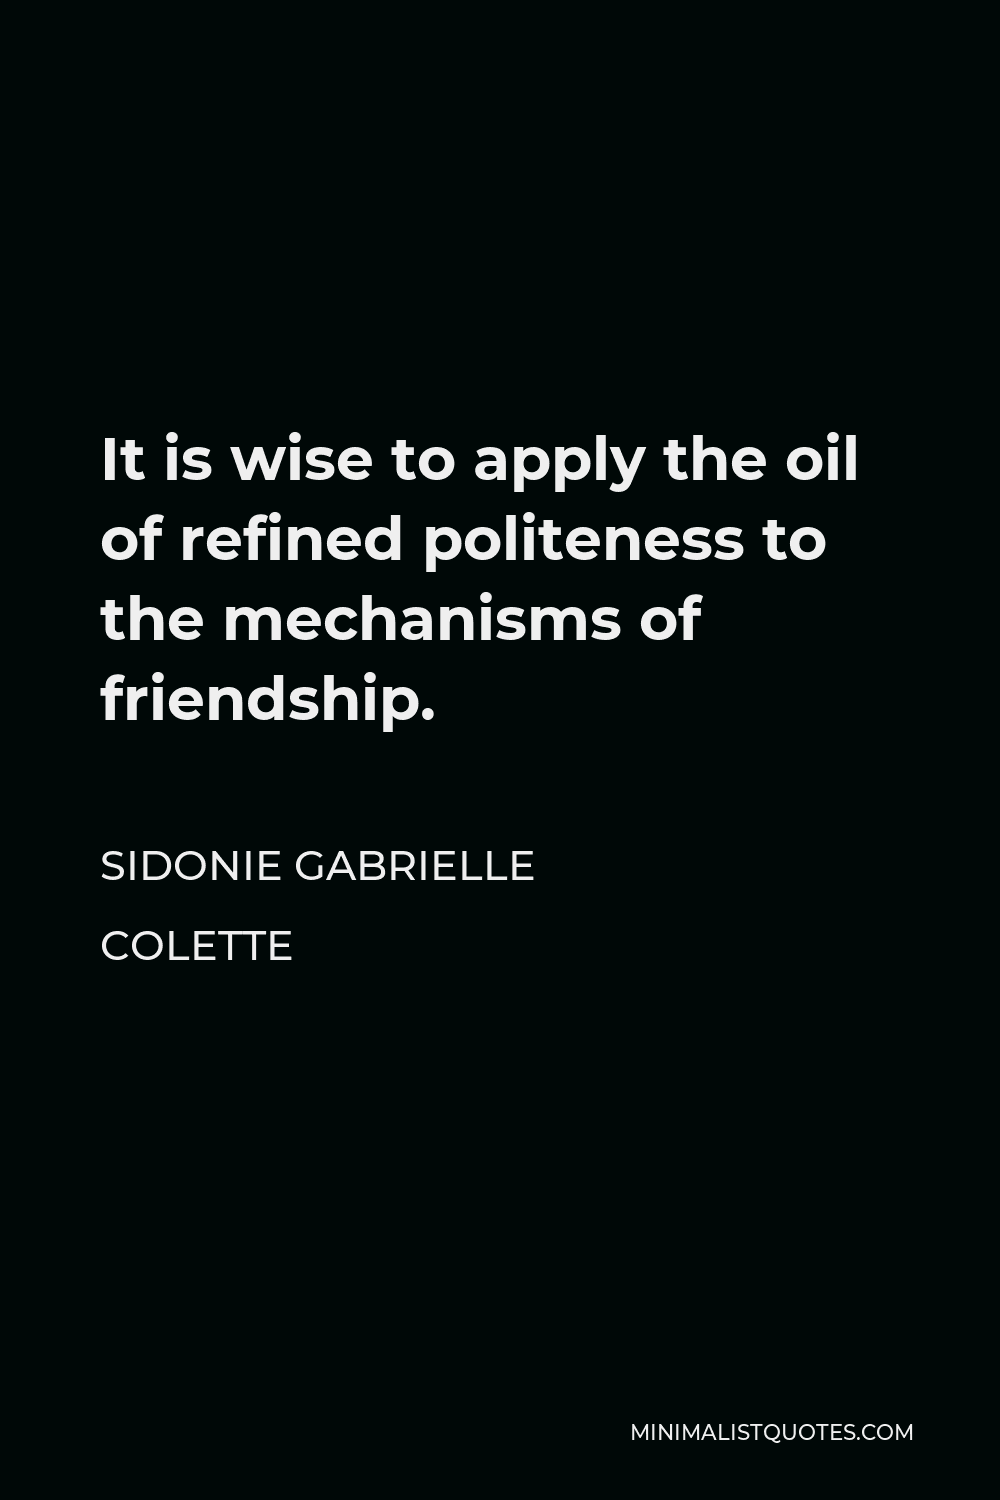 Sidonie Gabrielle Colette Quote - It is wise to apply the oil of refined politeness to the mechanisms of friendship.